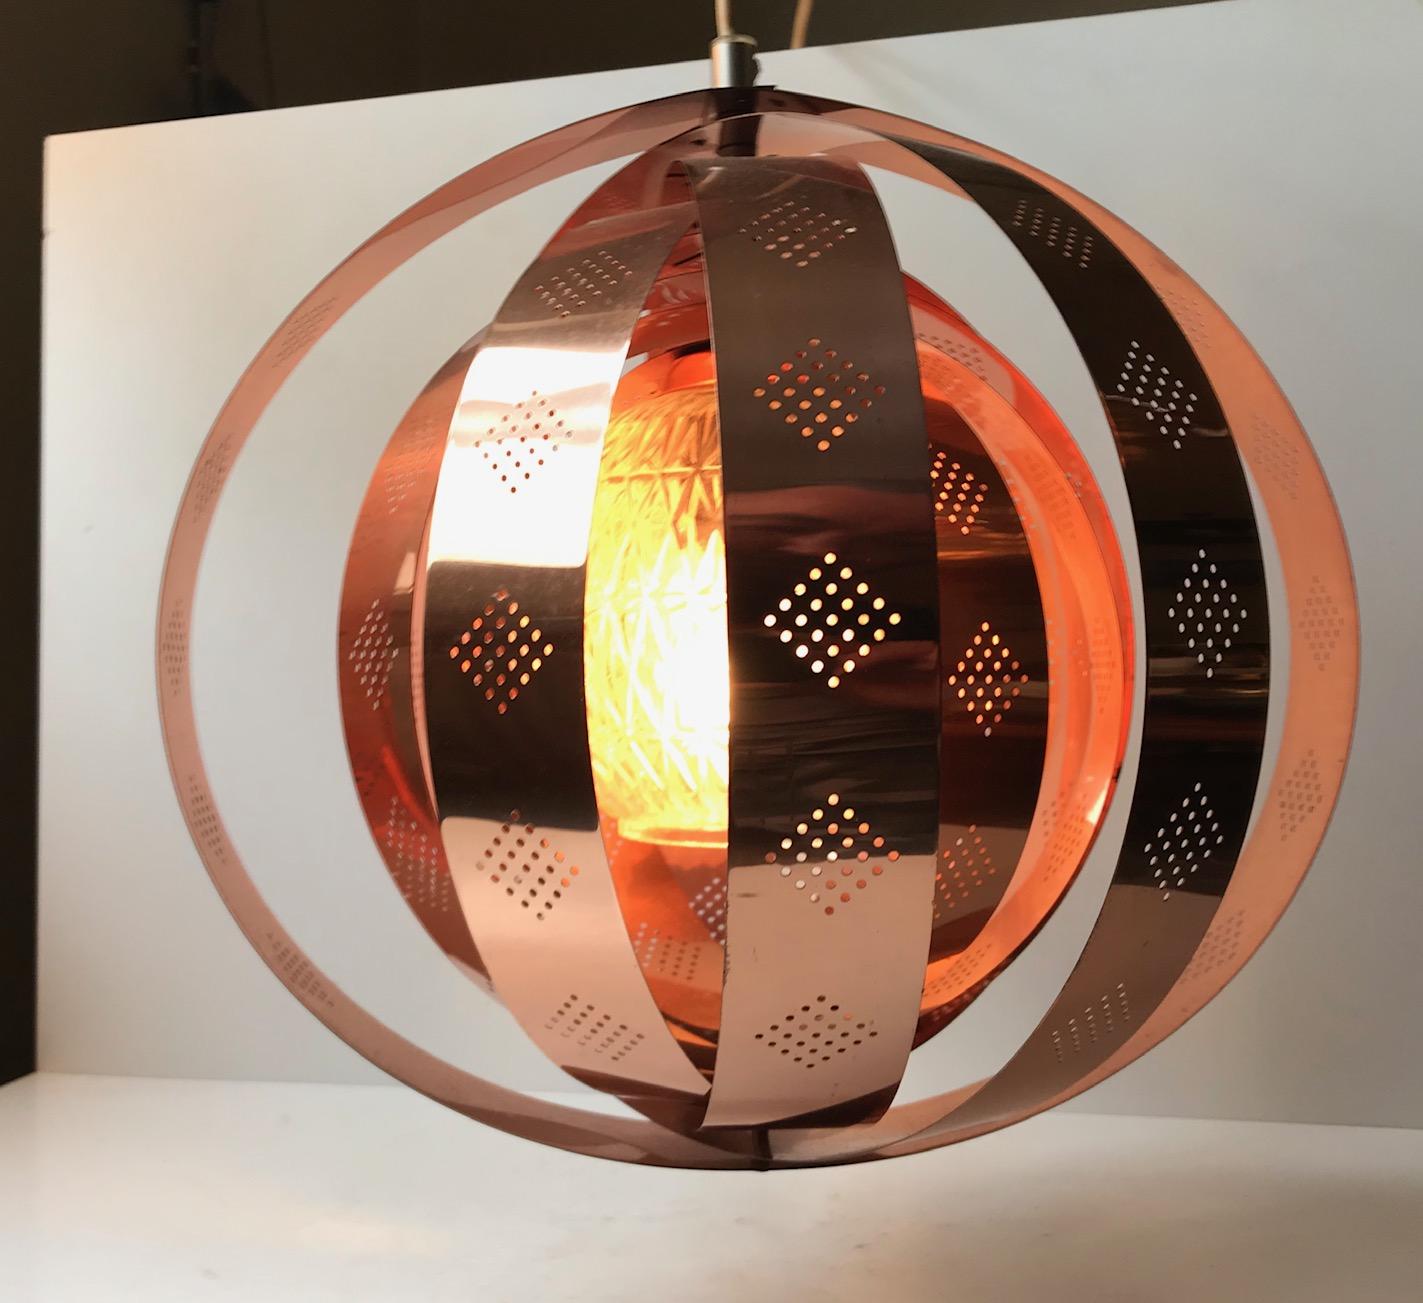 A rare Danish hanging light composed of rotating/modular copper rings and a centre shade in pressed glass. This Space Age design enables you to create a variety of different shapes. The most obvious ones being a moon or the outlines of the planet